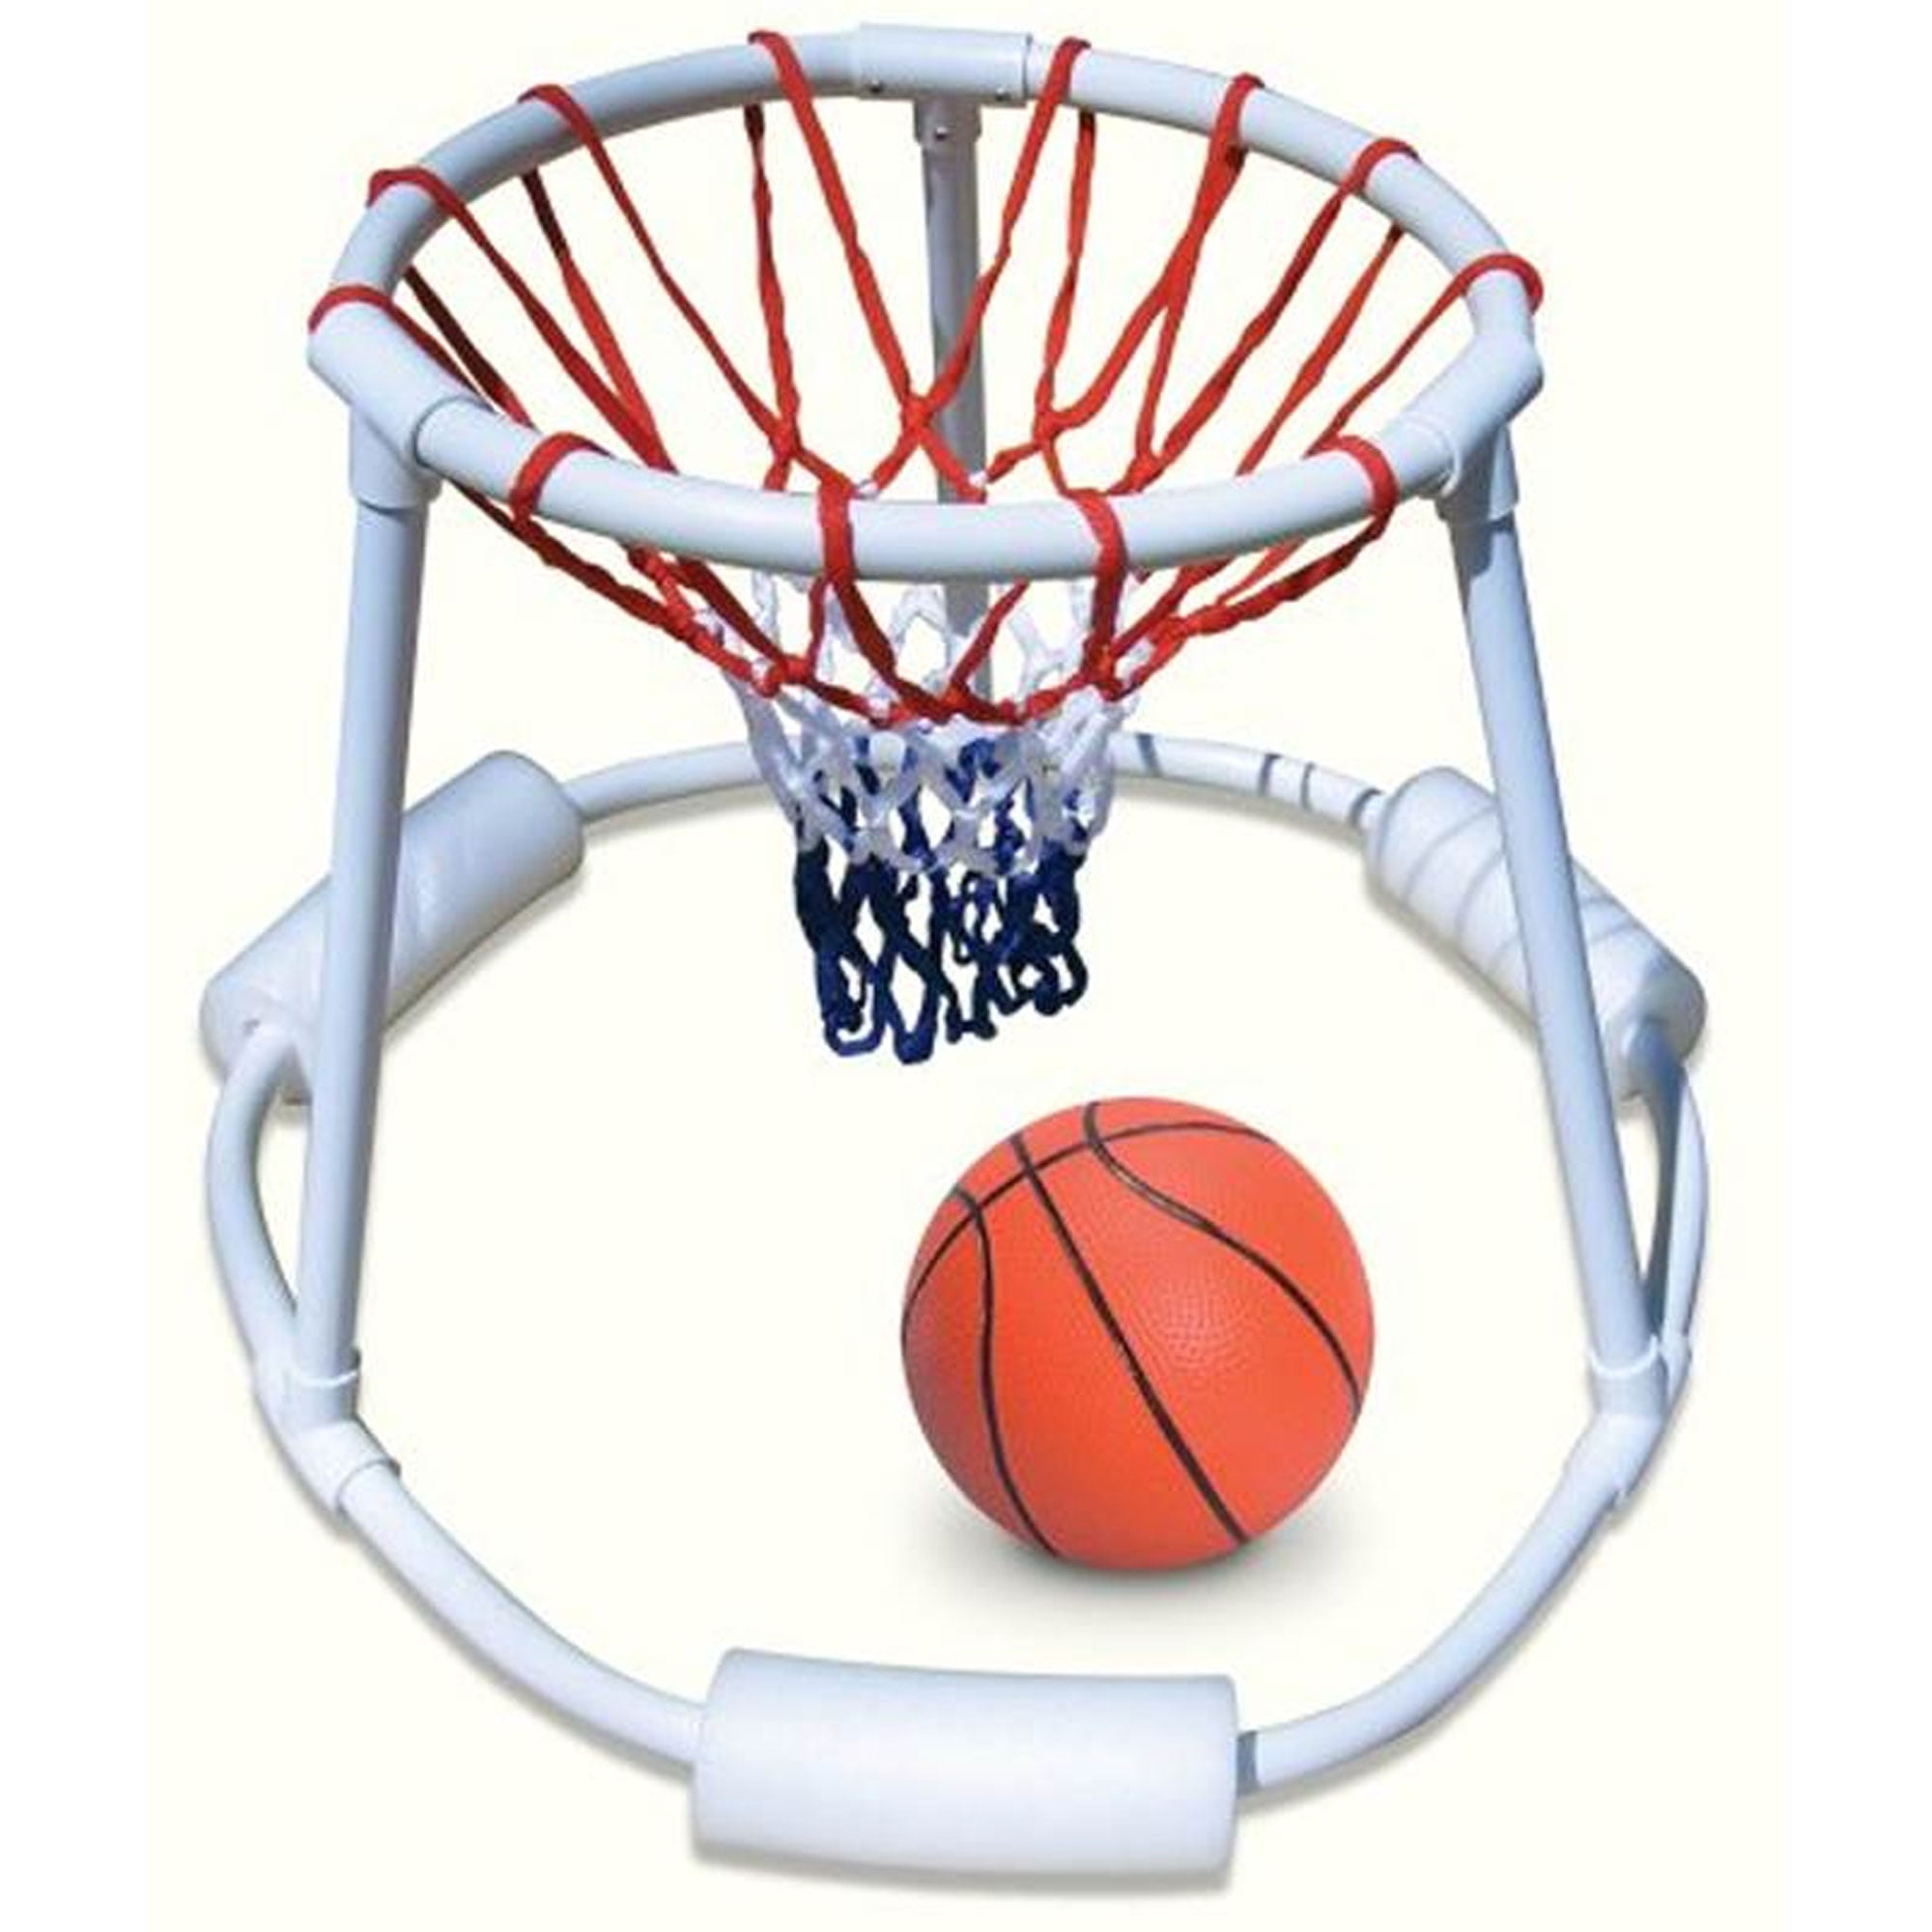 WHITE Fits Indoor or Outdoor Rims 4PCS Ultra Heavy Duty Basket BALL Net 